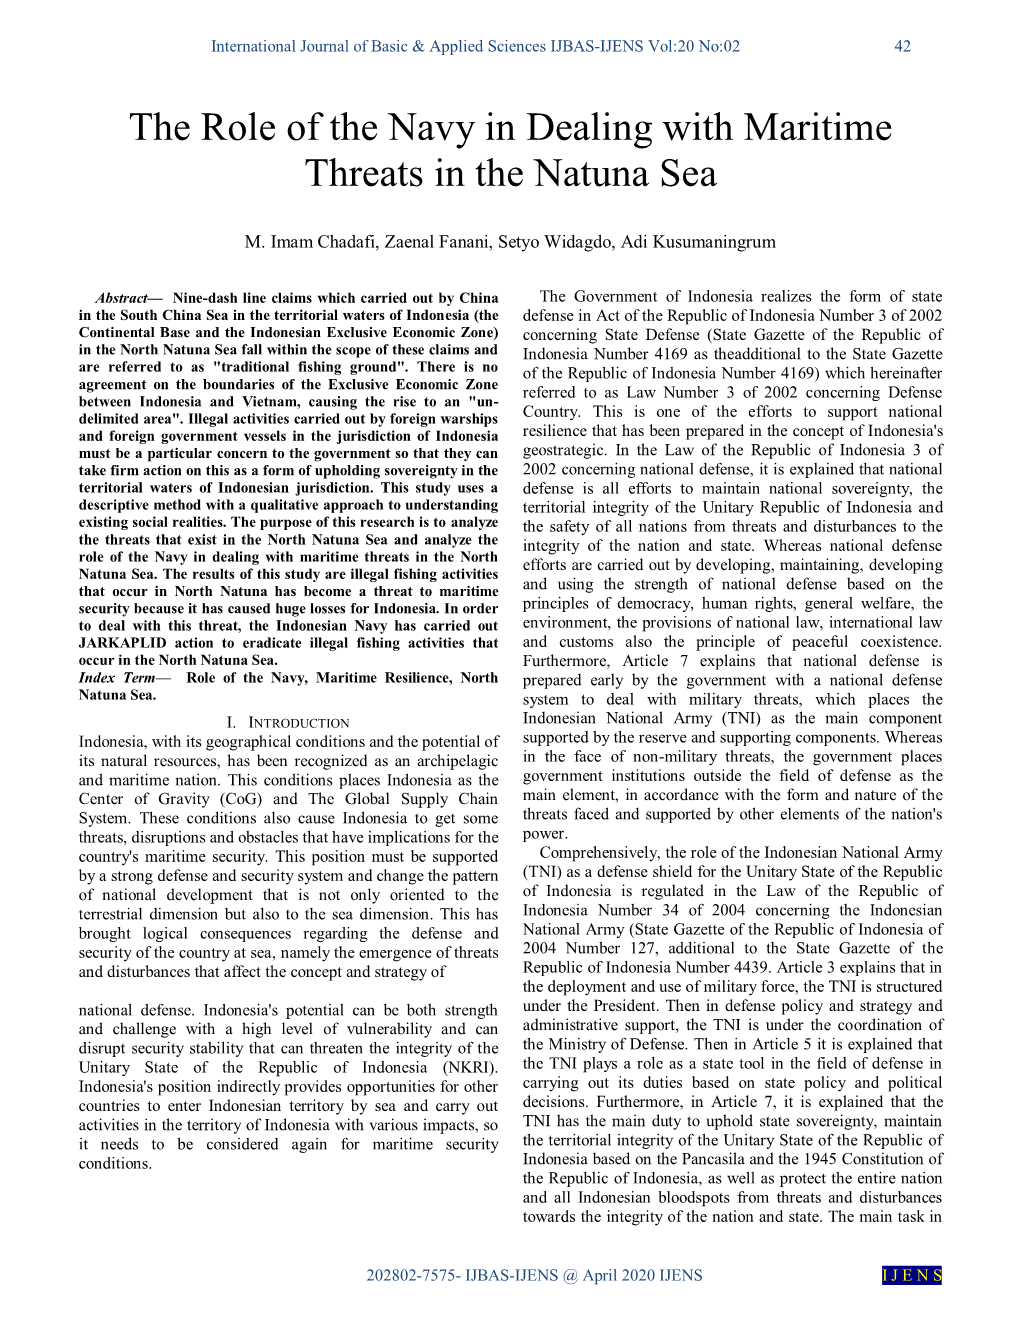 The Role of the Navy in Dealing with Maritime Threats in the Natuna Sea